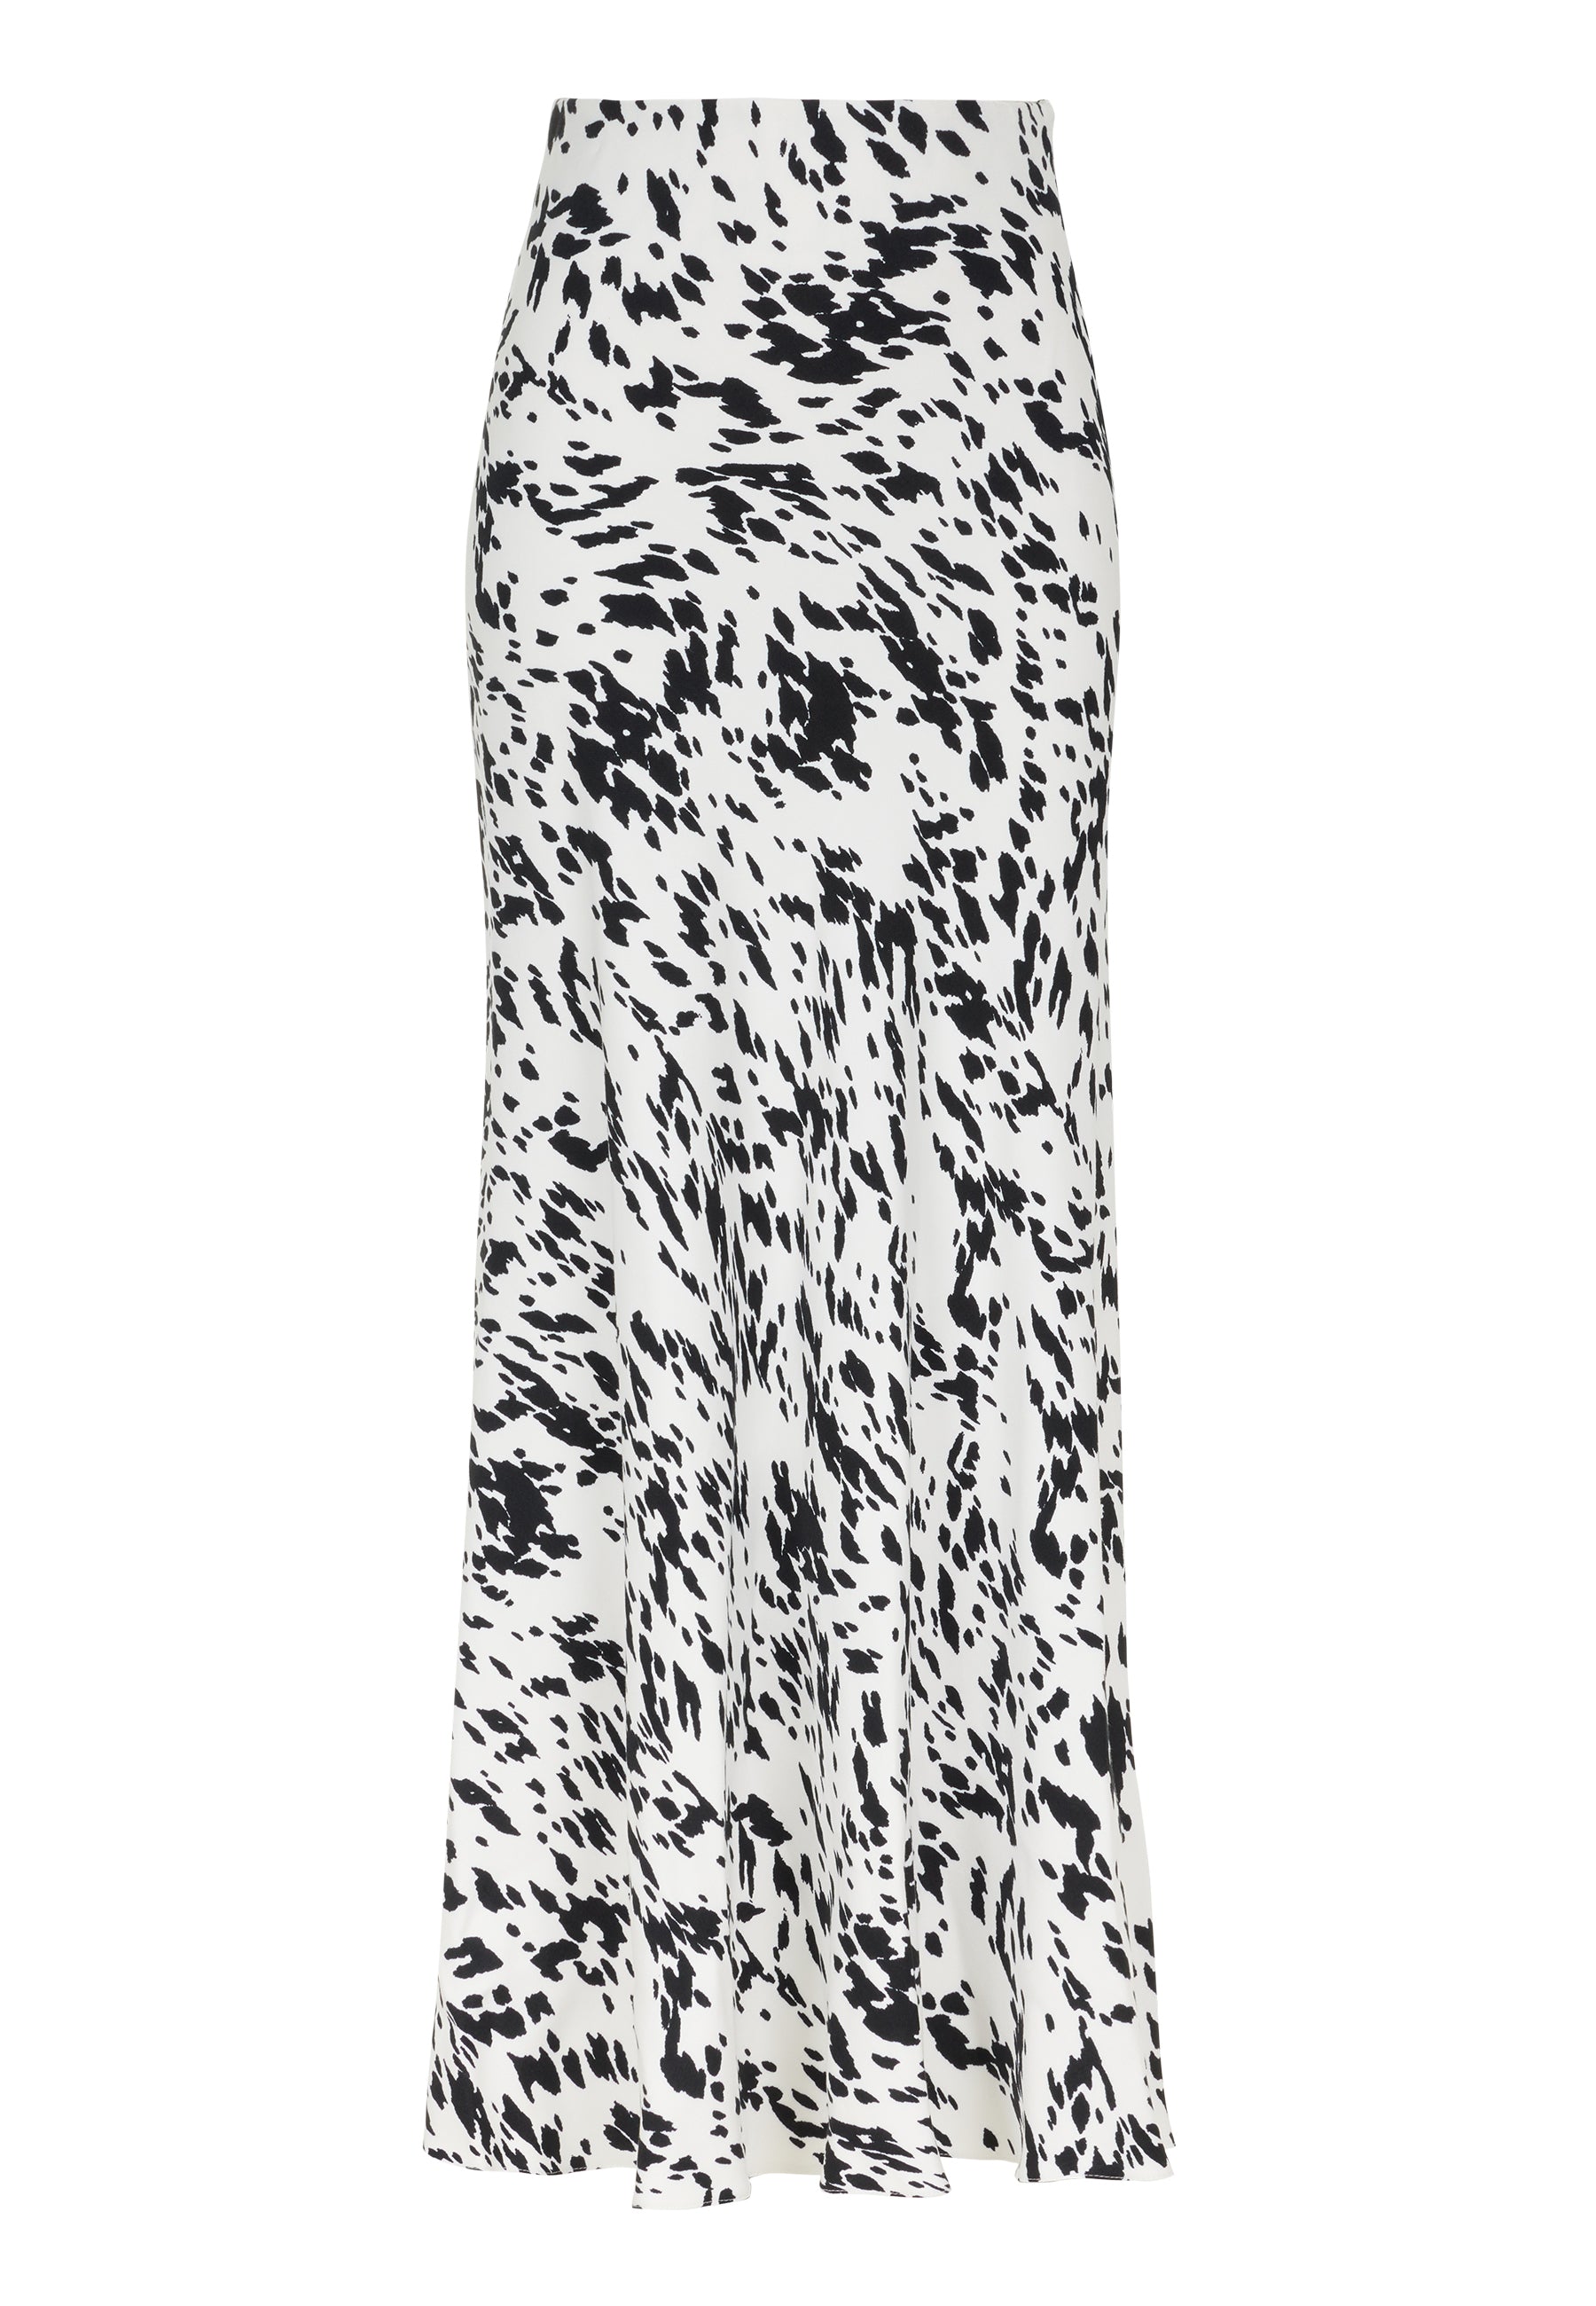 Nocturne Women's Printed Maxi Skirt In Black